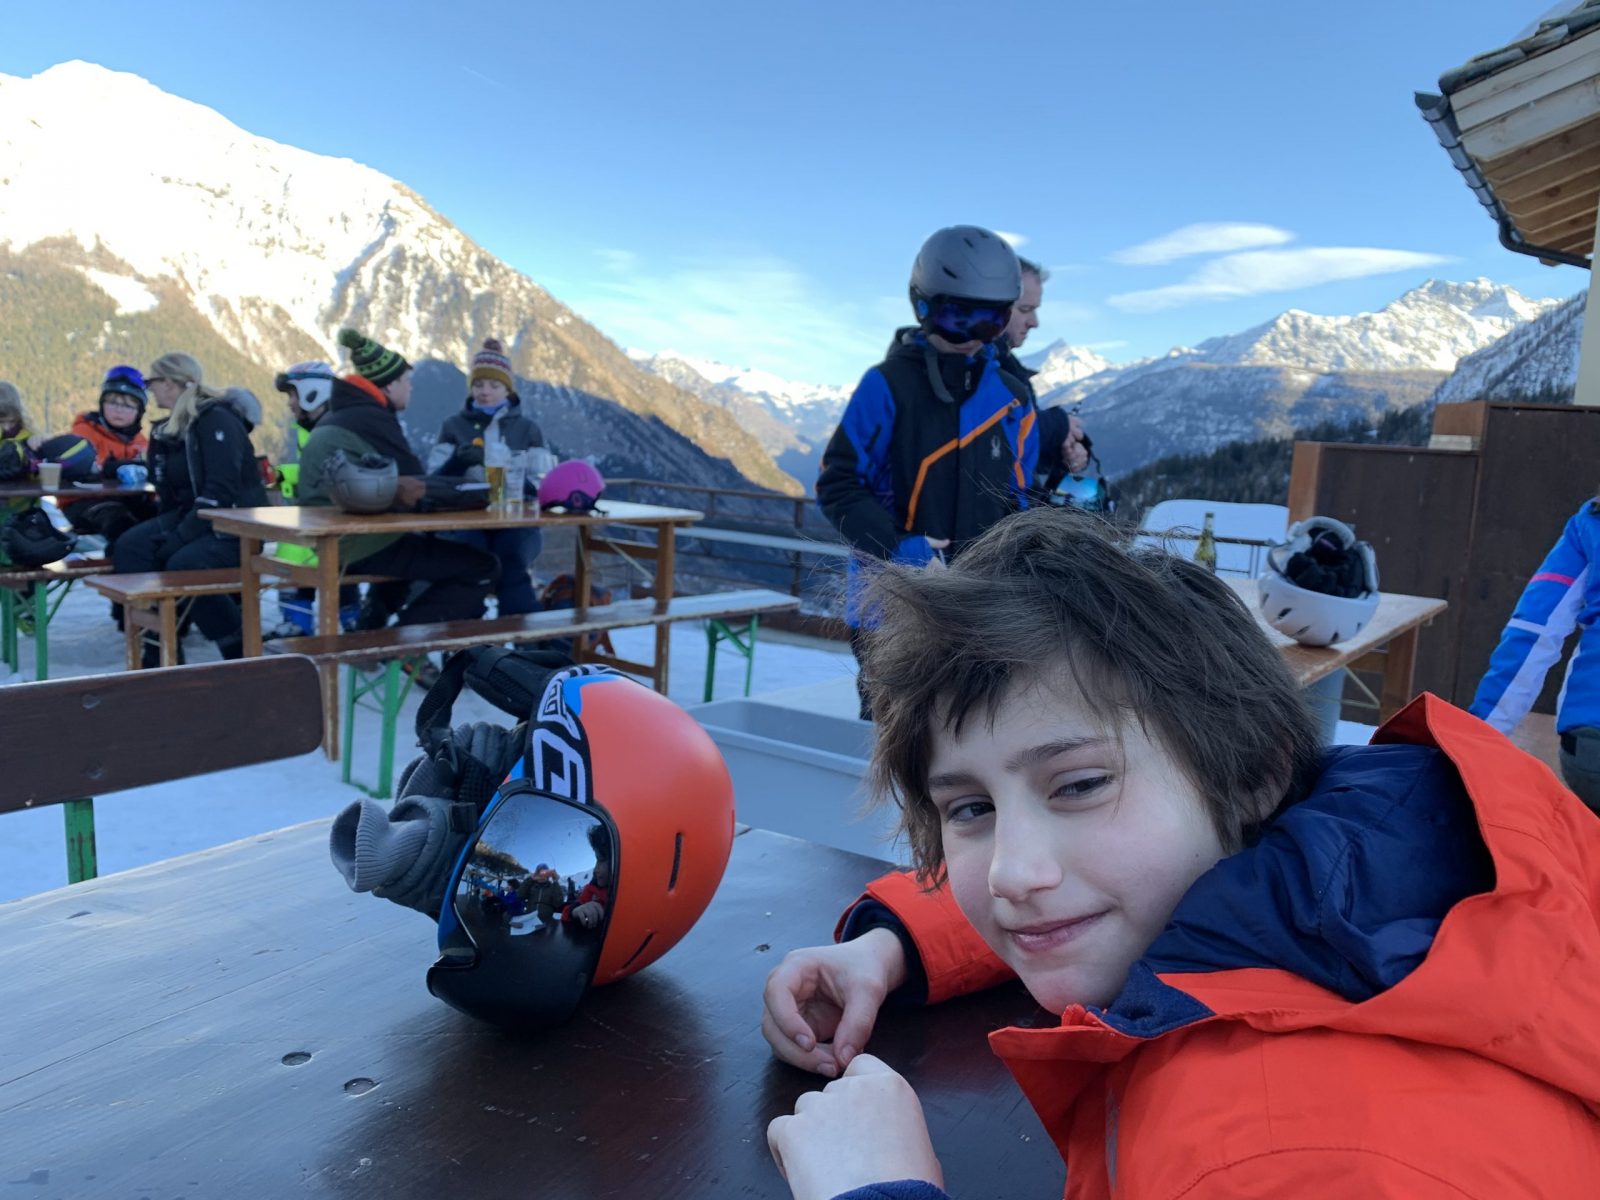 At the base of Courmayeur by Christiana at the end of the ski day. Our half term ski-safari holiday based in the Valdigne of Aosta Valley- Courmayeur, Pila and La Thuile.